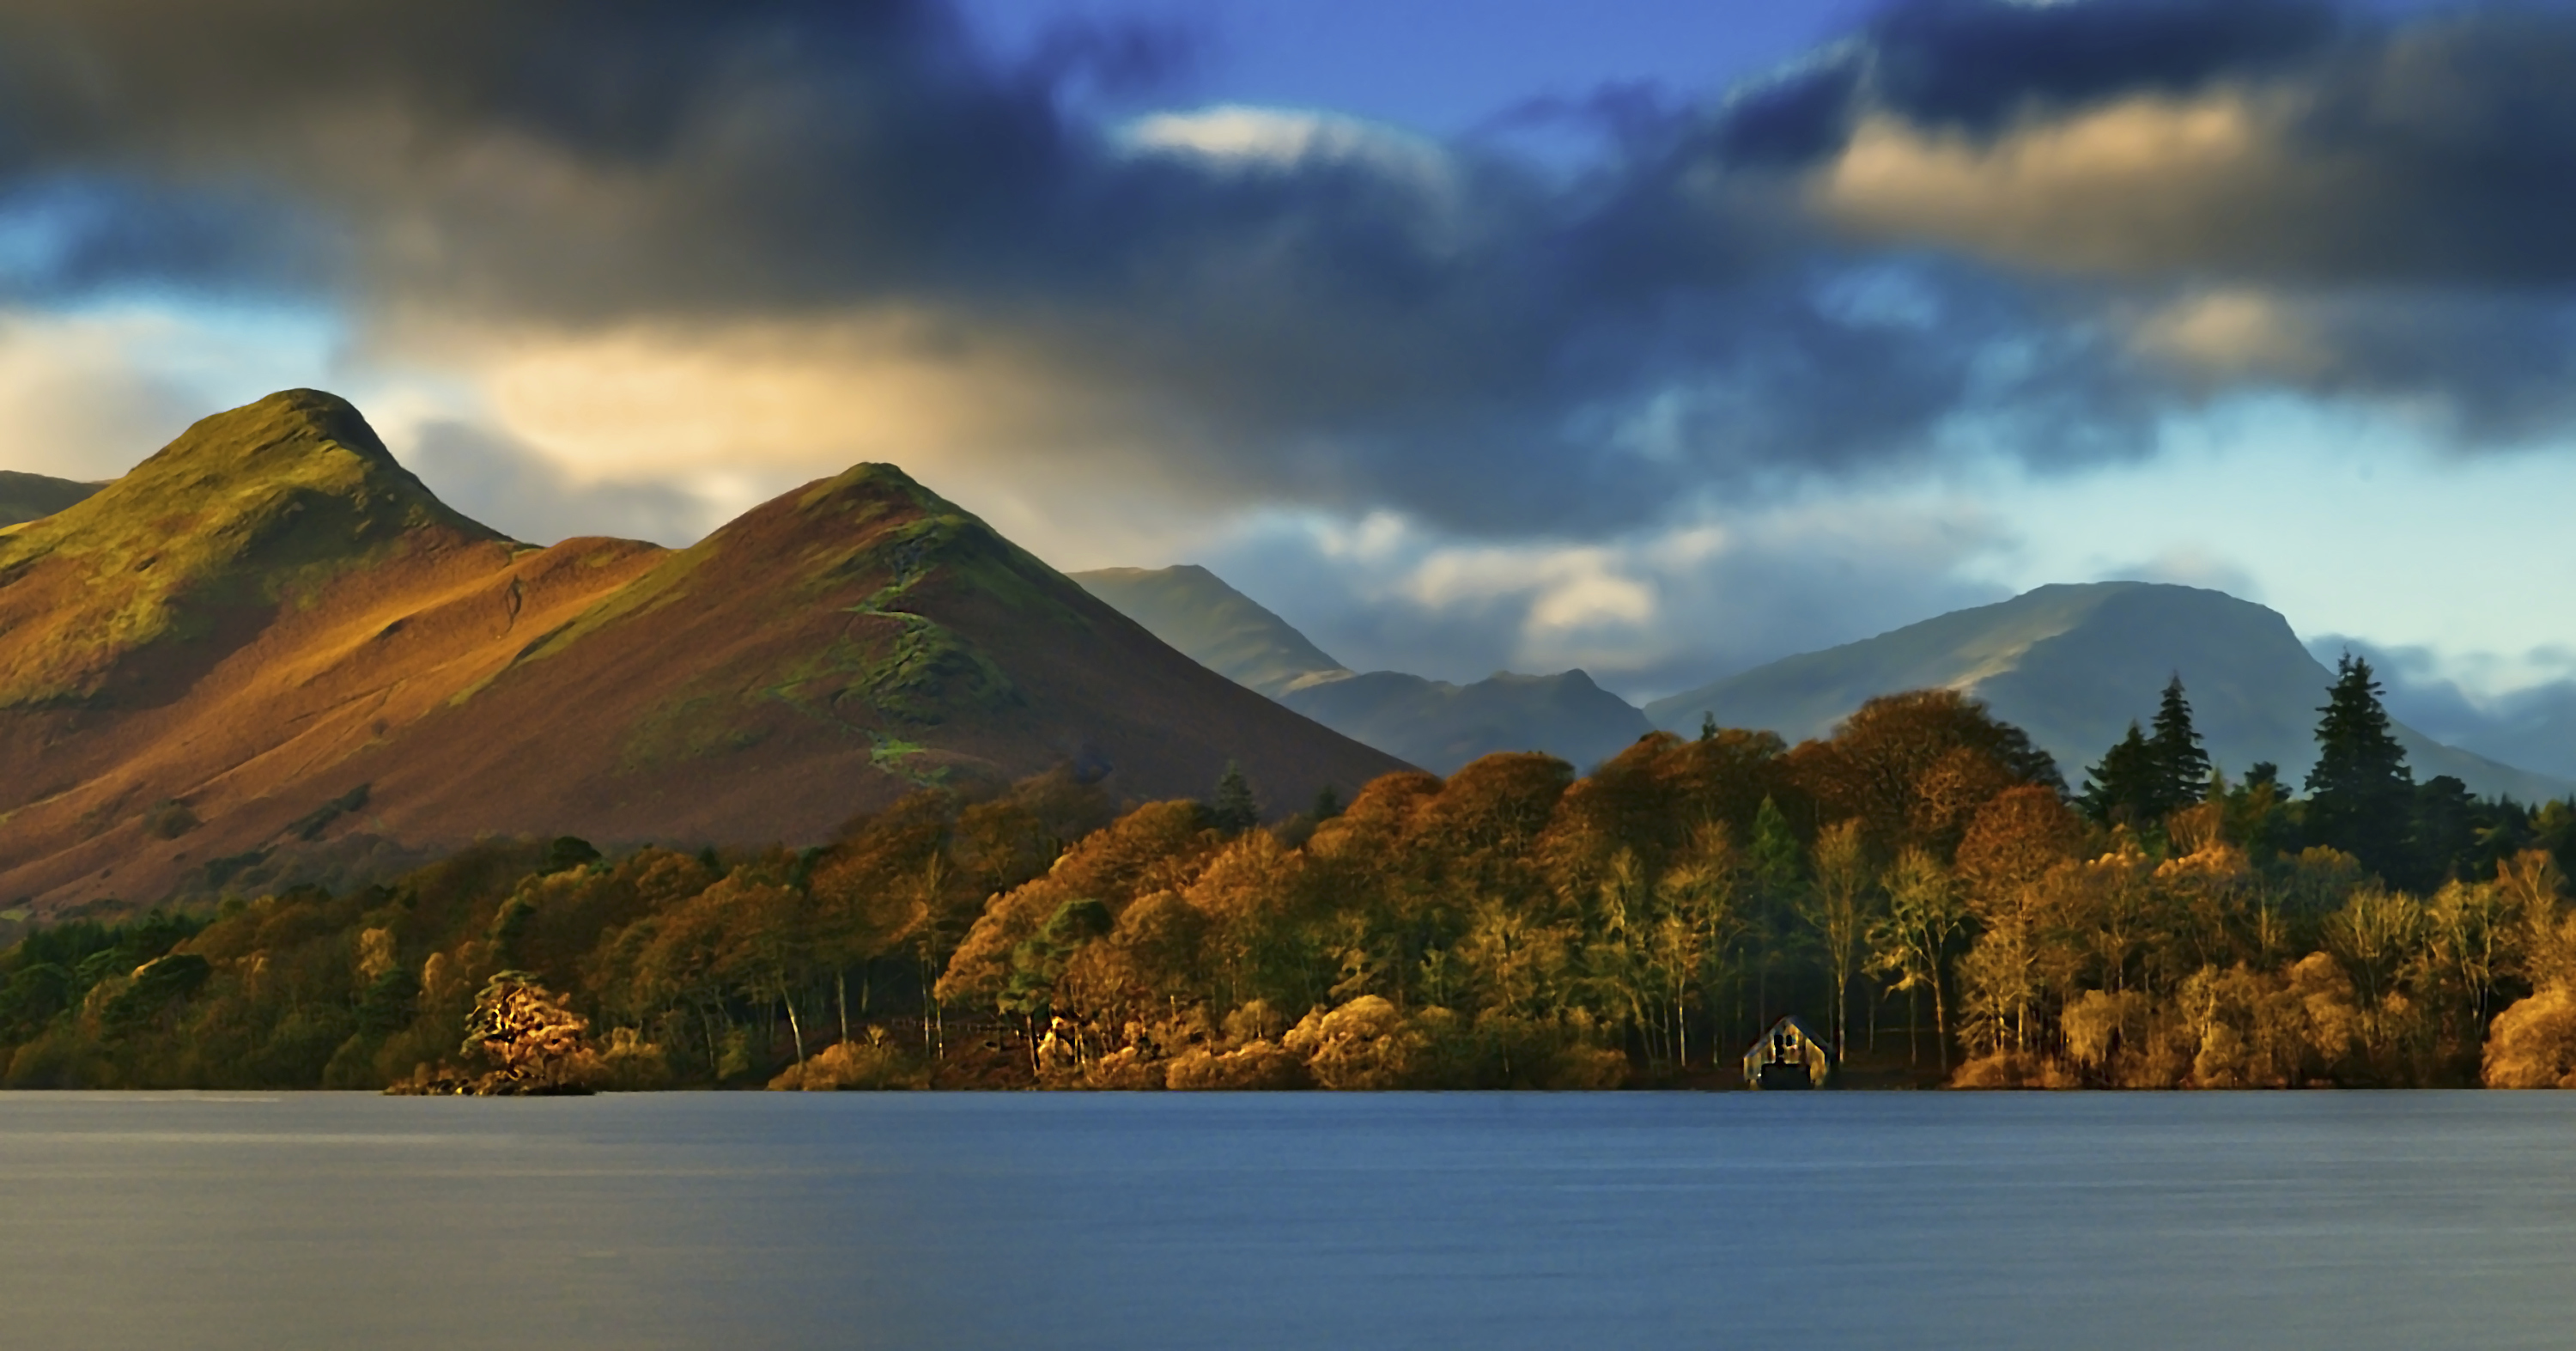 Catbells over Derwentwater, the Lake District National Park - location for Star Wars scenes